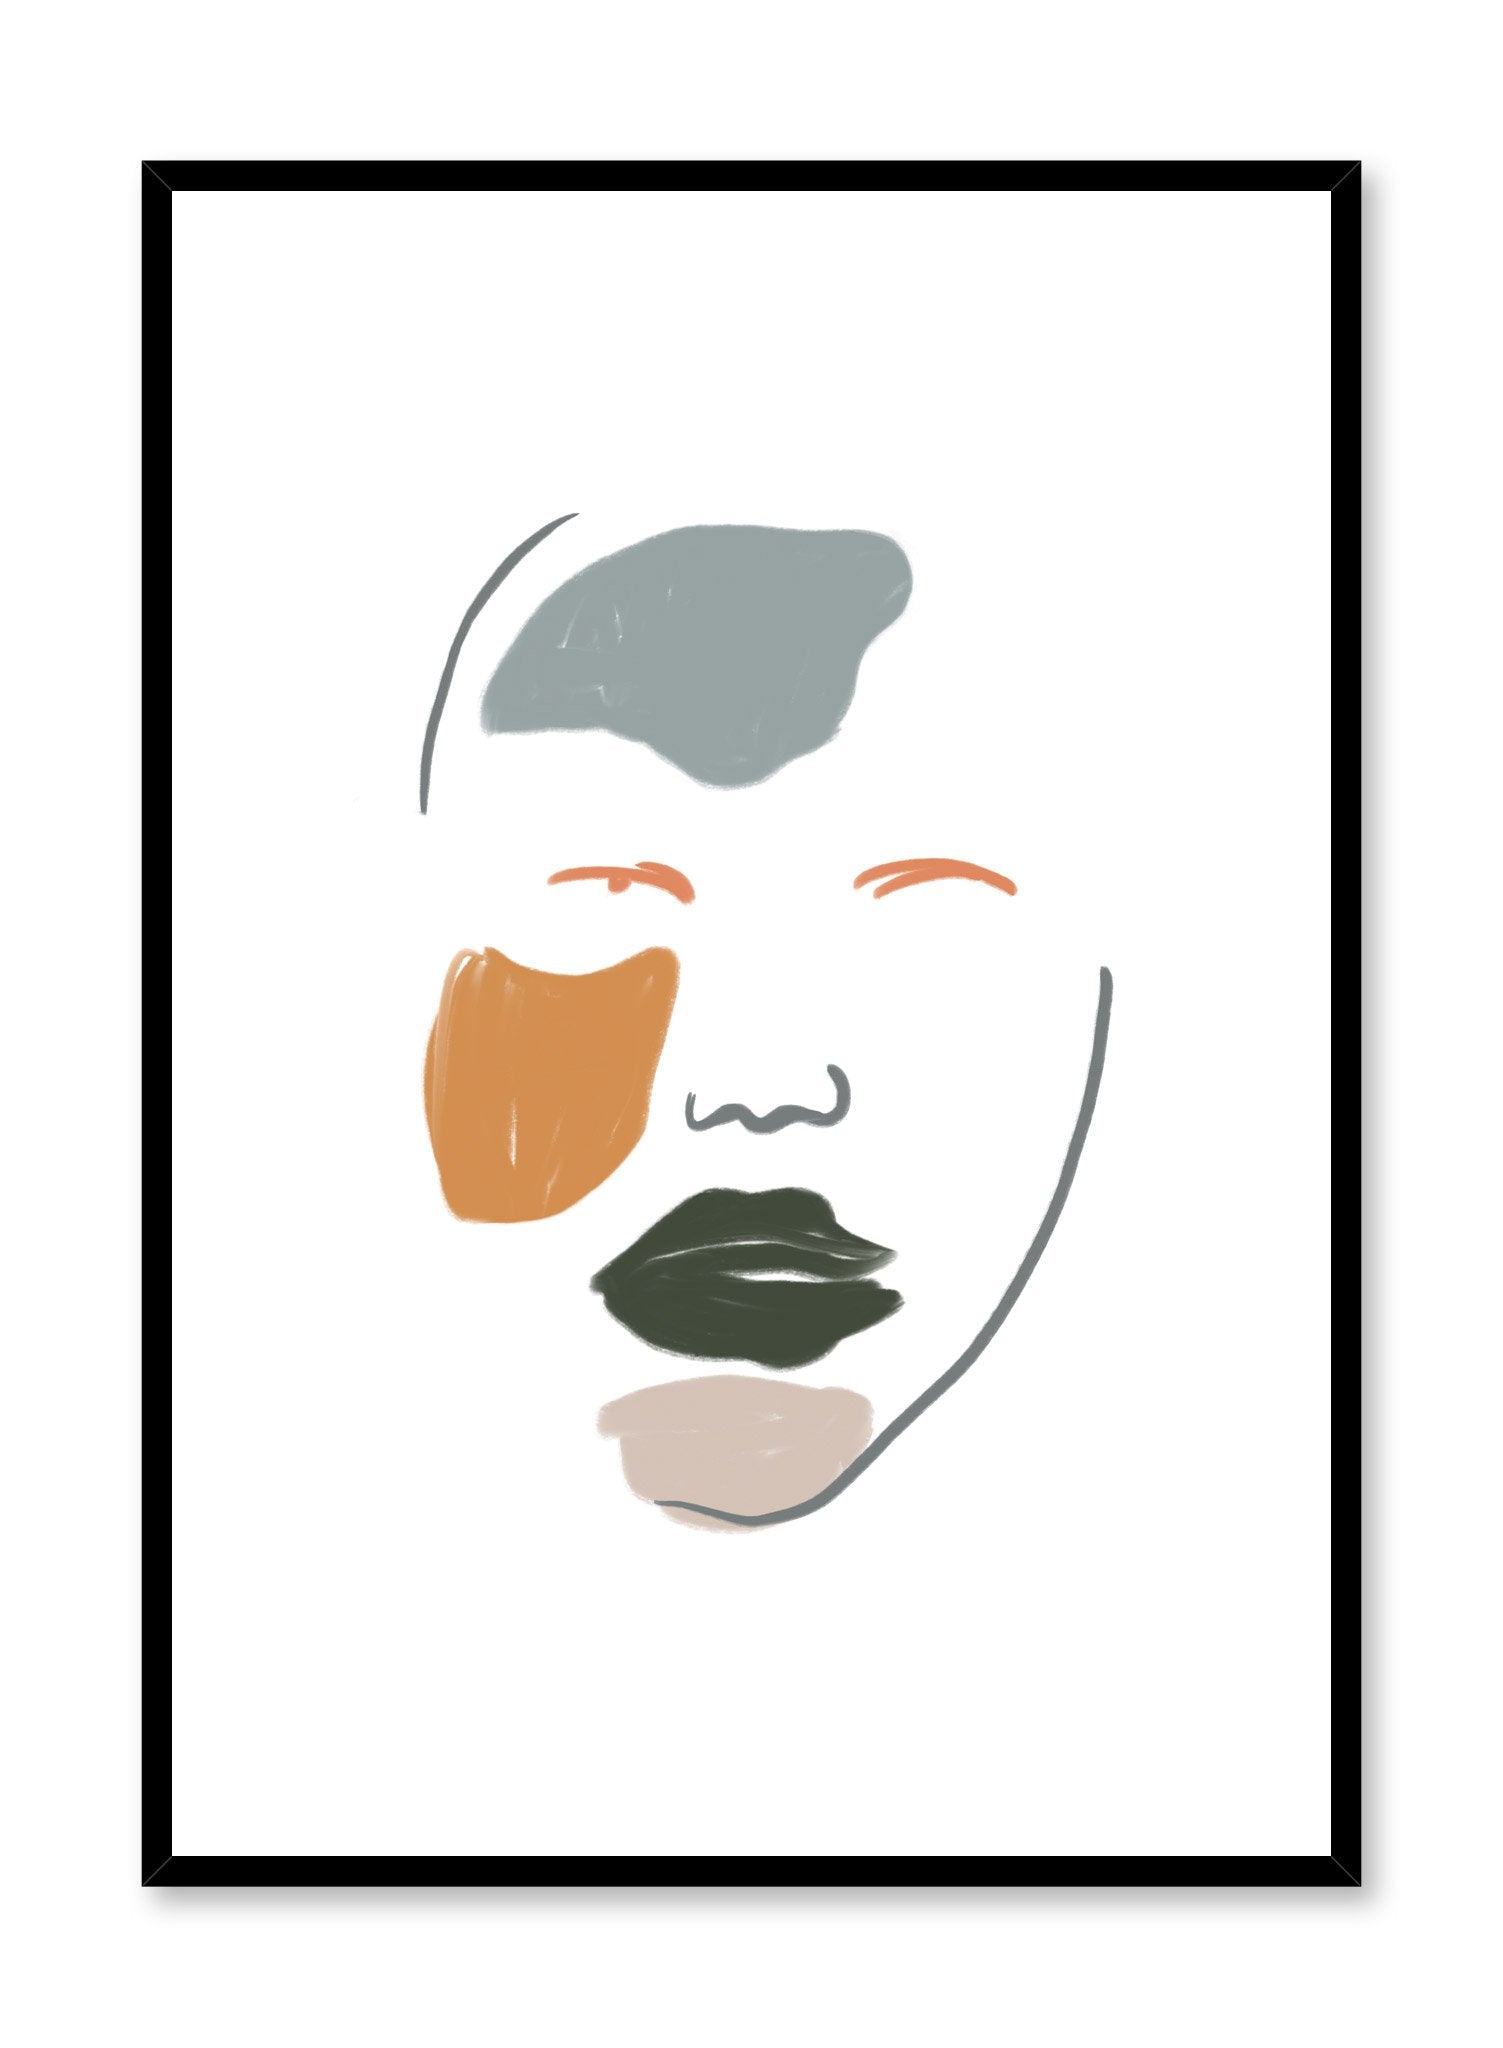 Modern minimalist poster by Opposite Wall with feminine woman illustration - Camoflage